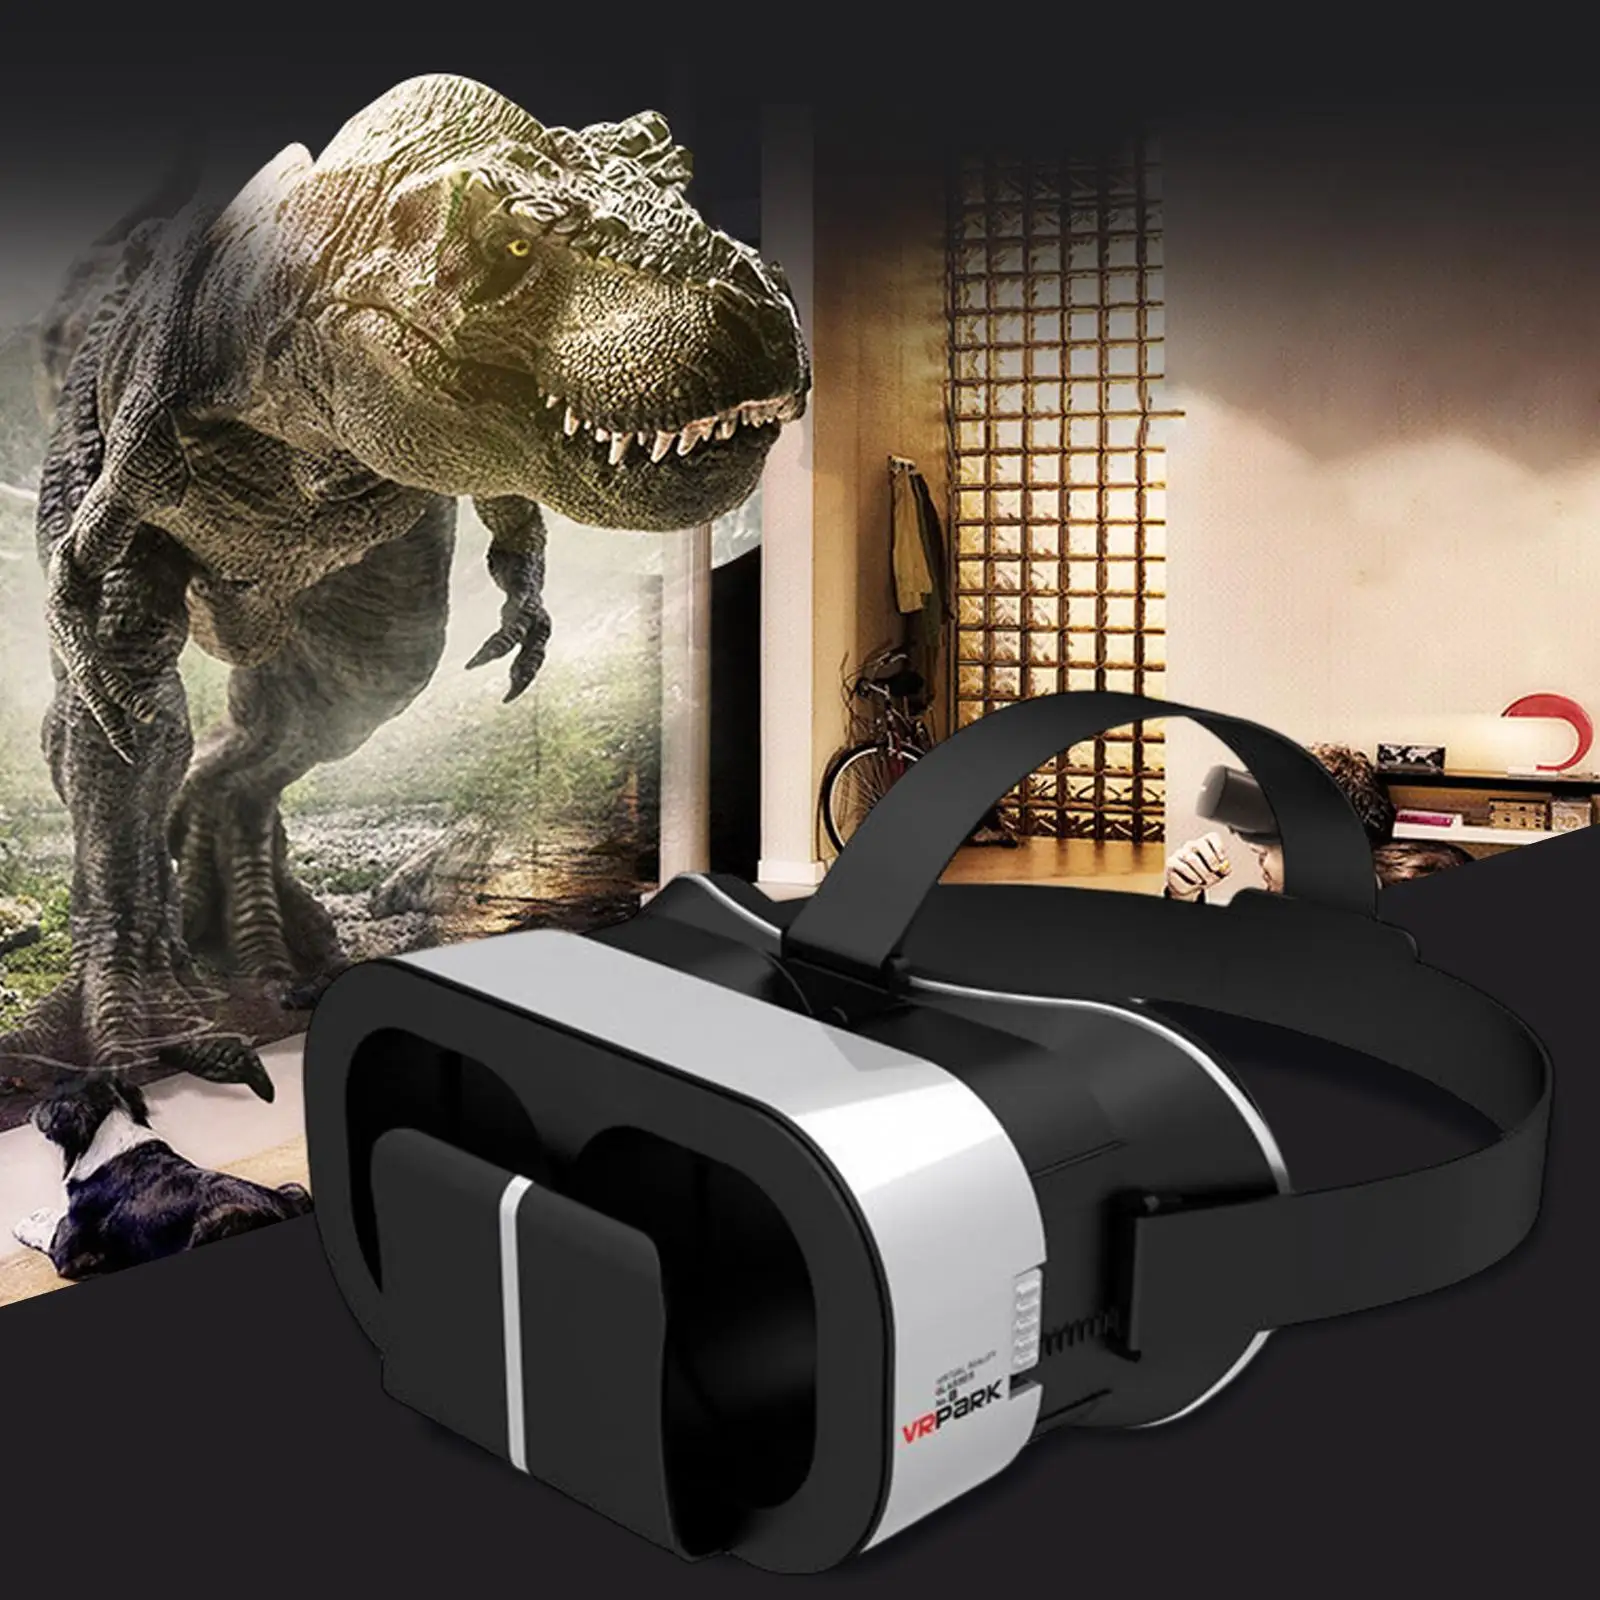 Comfortable 4 Glasses  Reality Headset Wide Angle  Giant Screen for 4.7-6.7